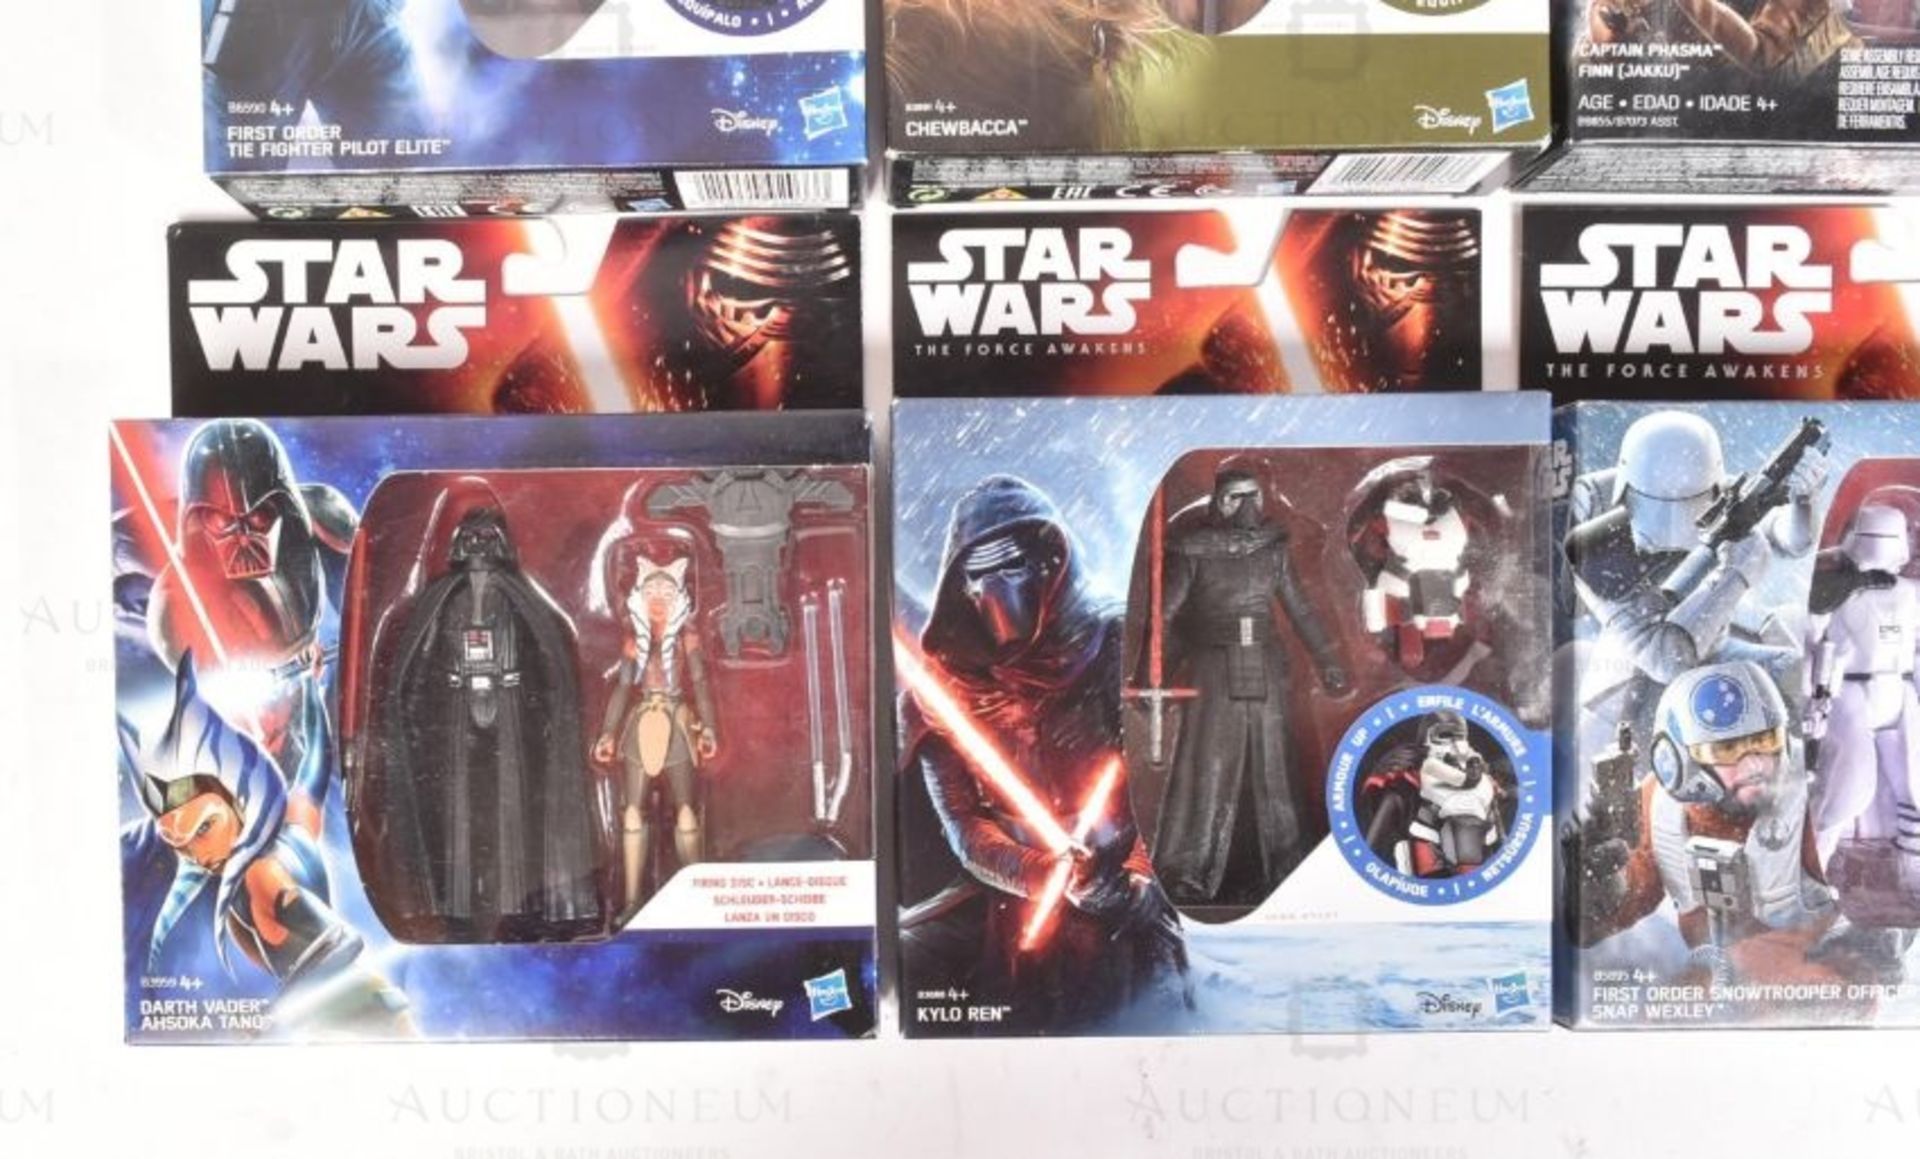 STAR WARS - DISNEY - BOXED ACTION FIGURES - Image 3 of 6